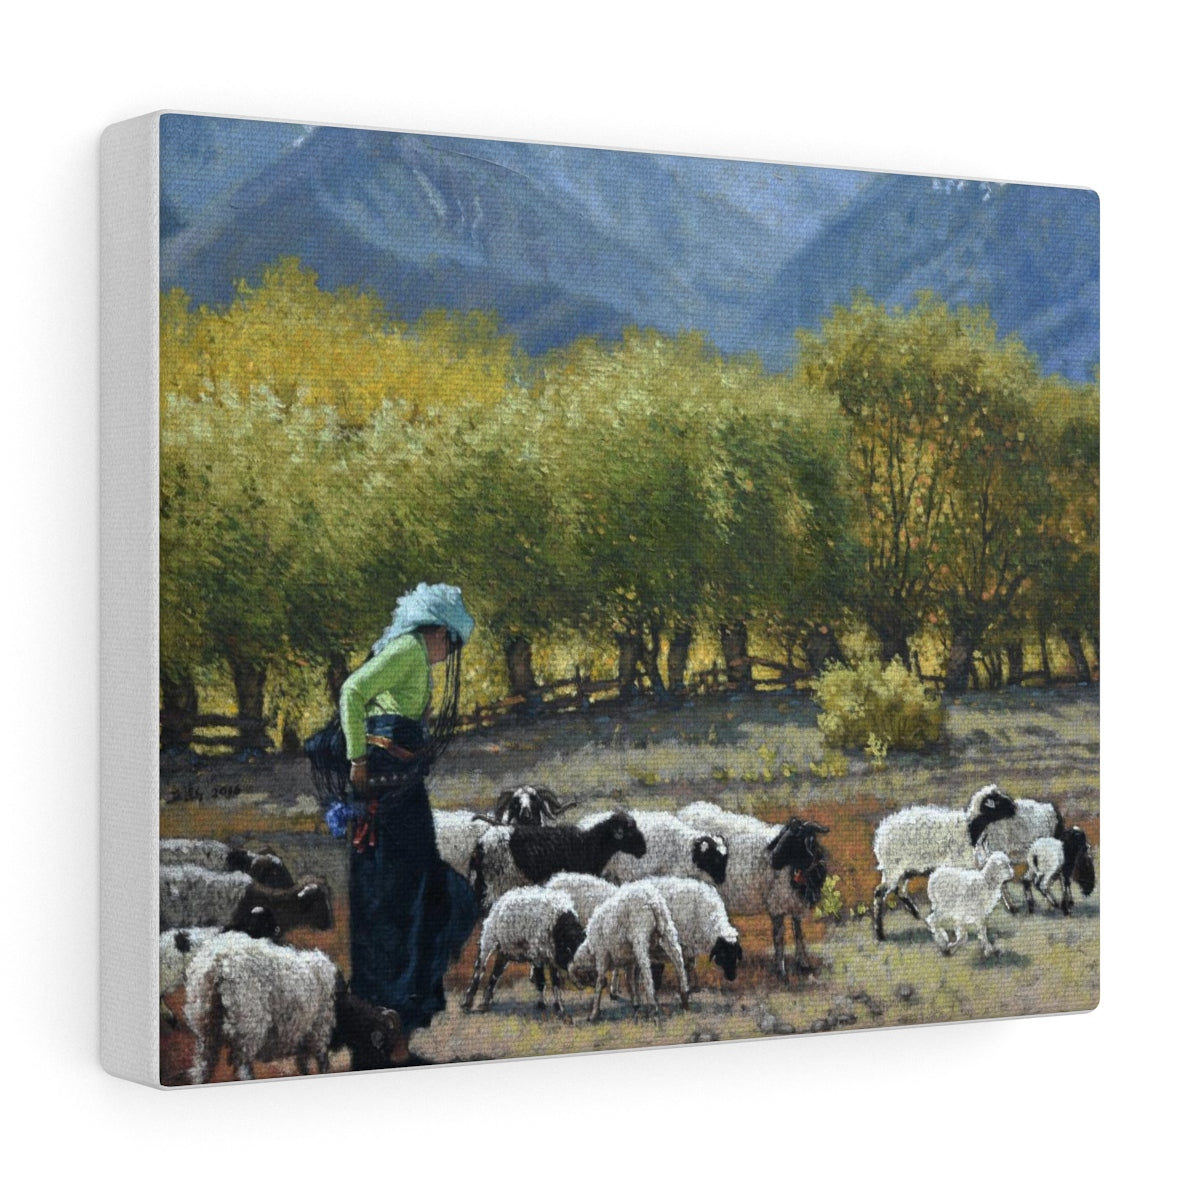 Canvas Gallery Wraps - Spring Comes To the QiLian Maintain